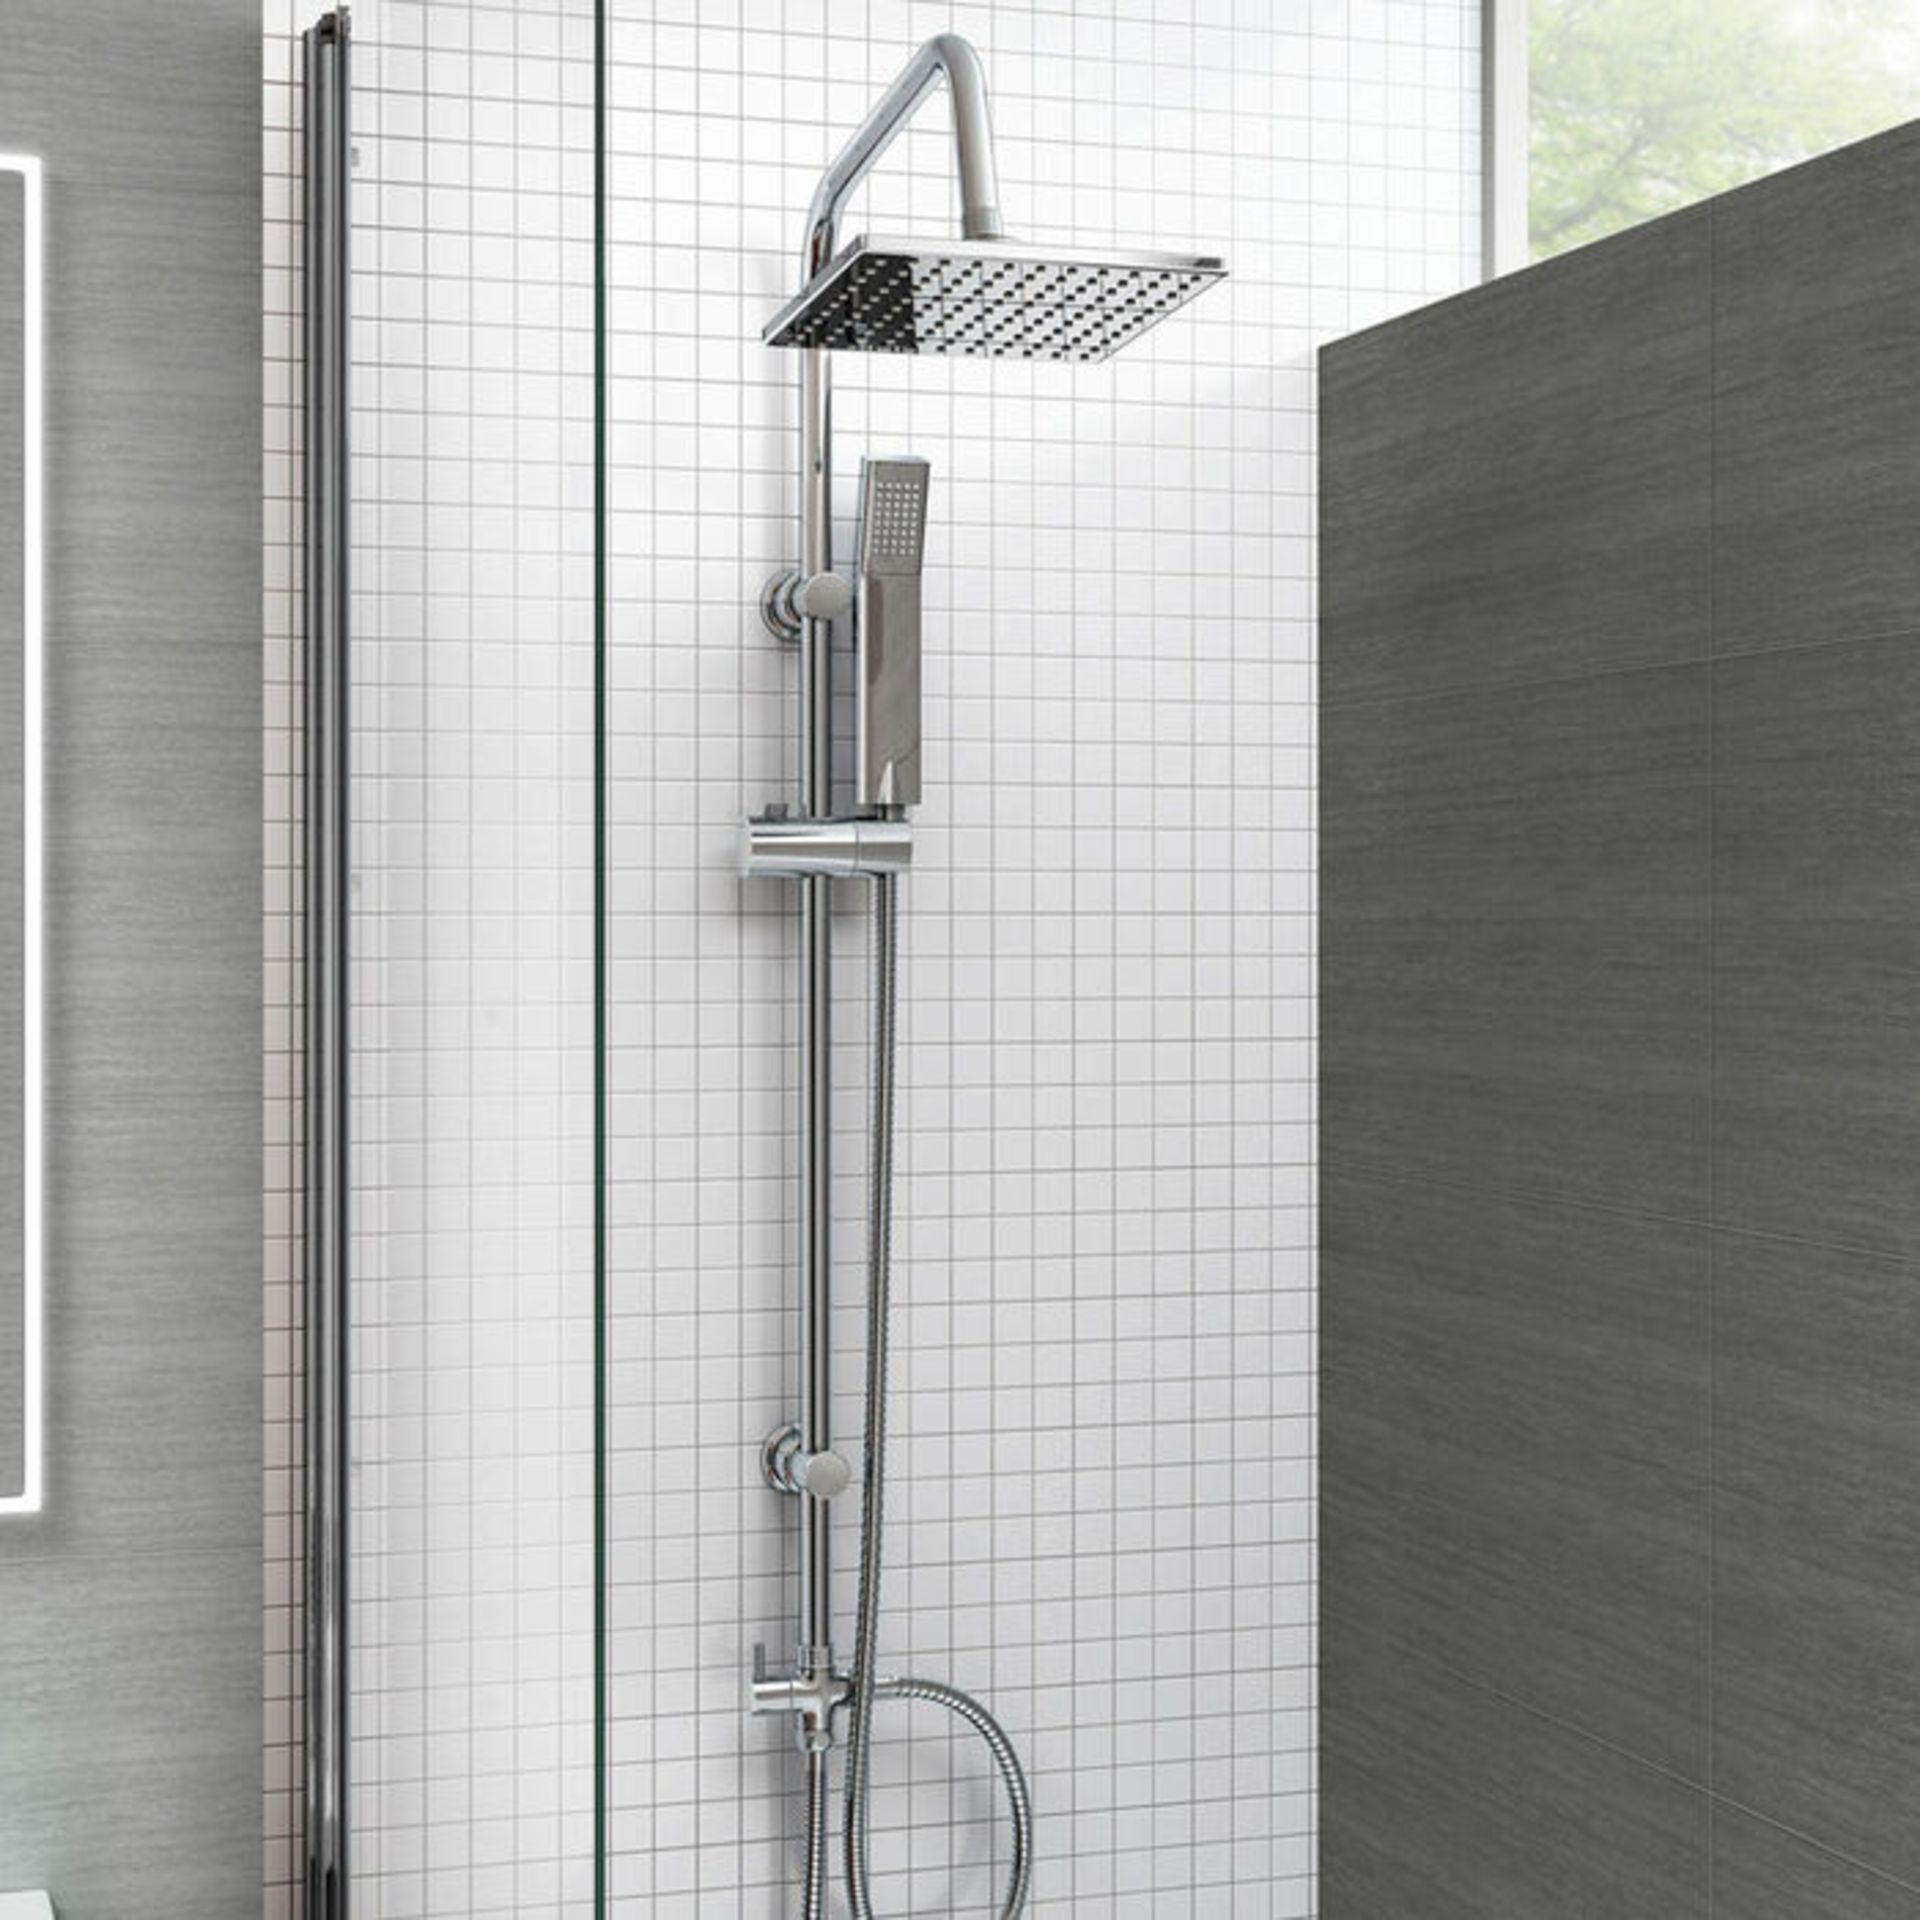 200mm Square Head, Riser Rail & Handheld Kit Quality stainless steel shower head with Easy Cle...